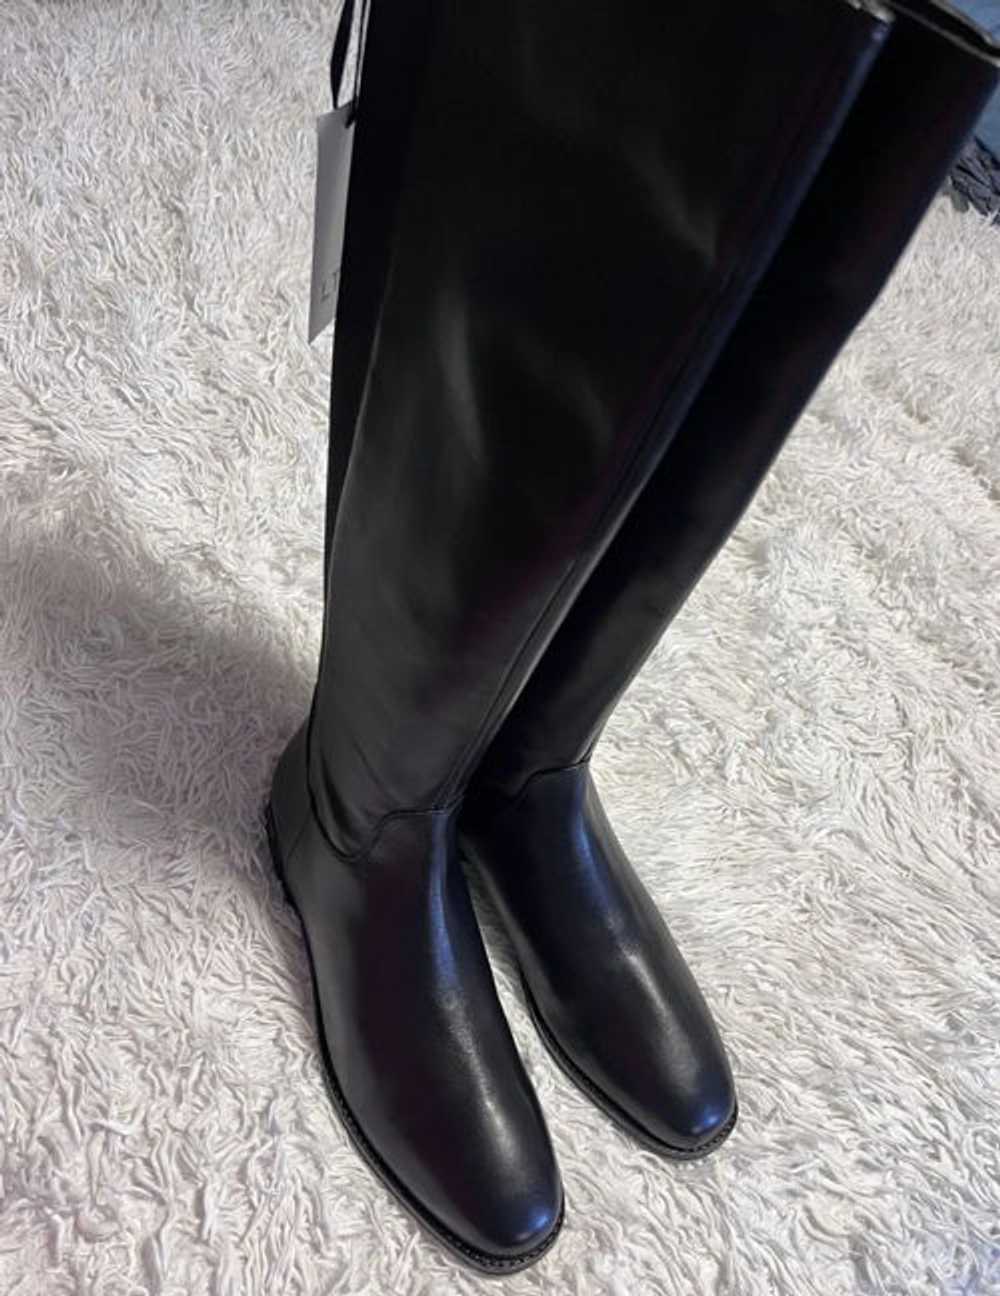 Tall Size Knee high boots - image 2